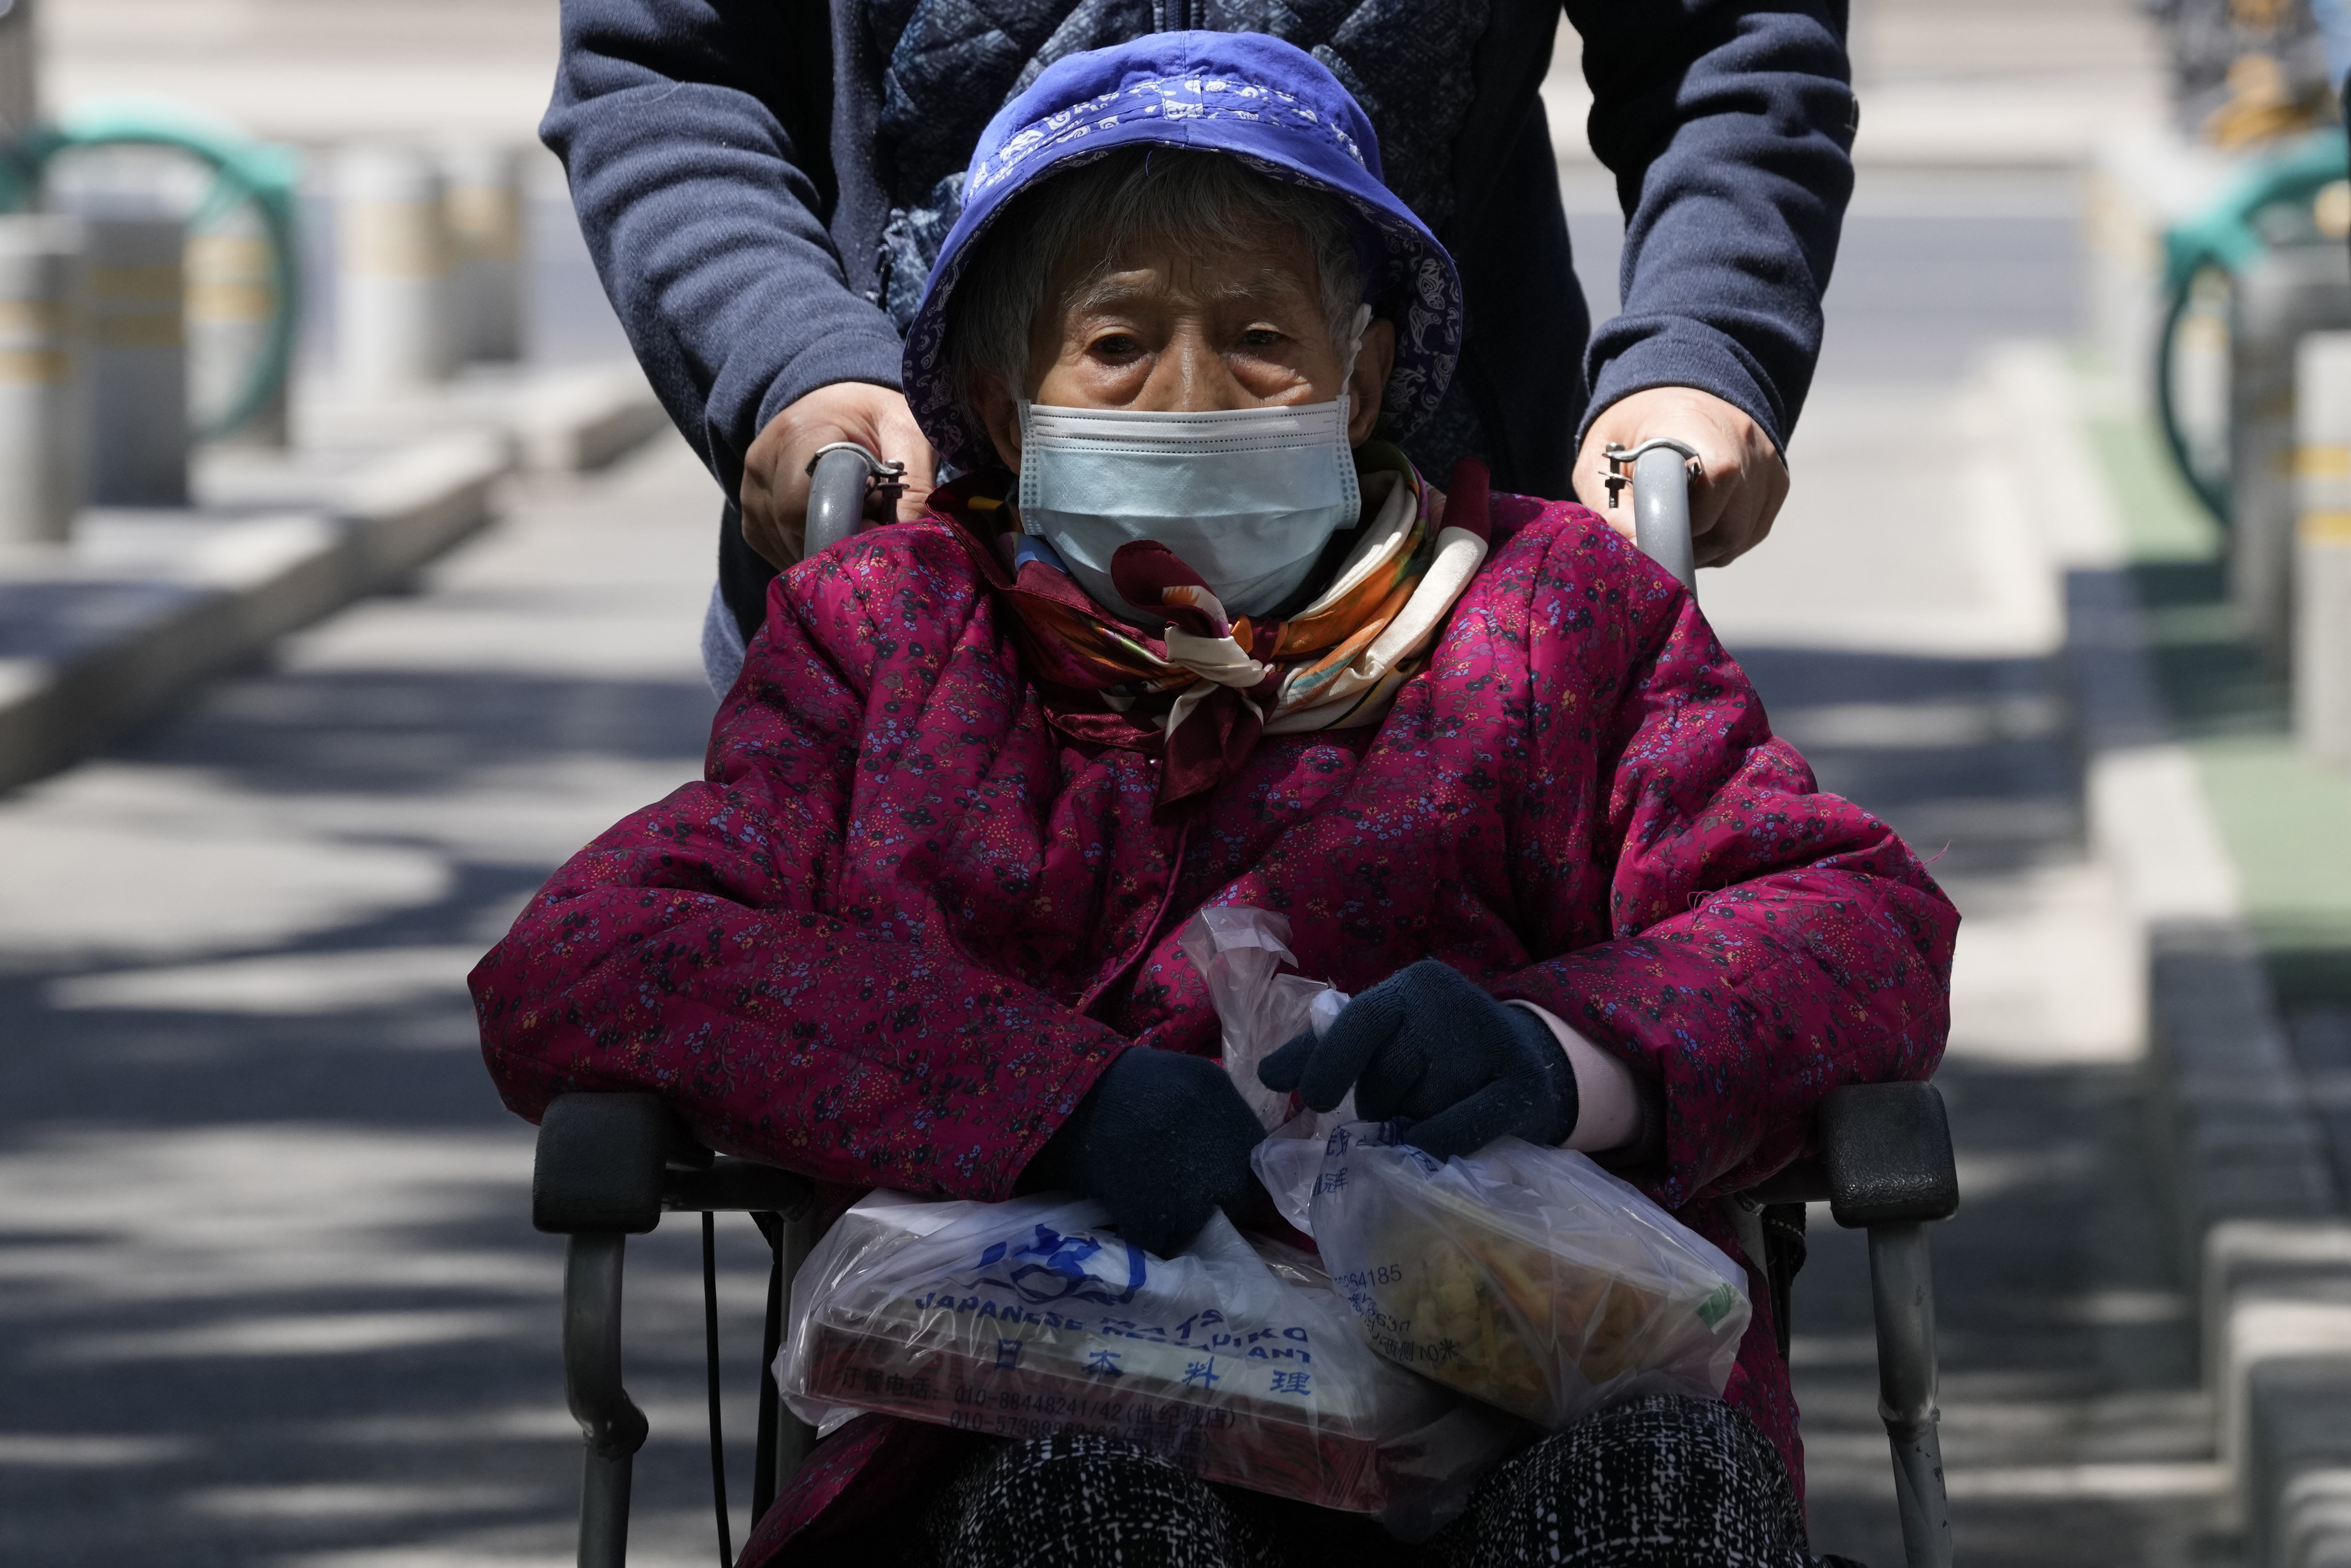 Only 76.6 per cent of Chinese people aged 80 and above have received their first dose of the Covid-19 vaccine. Photo: AP